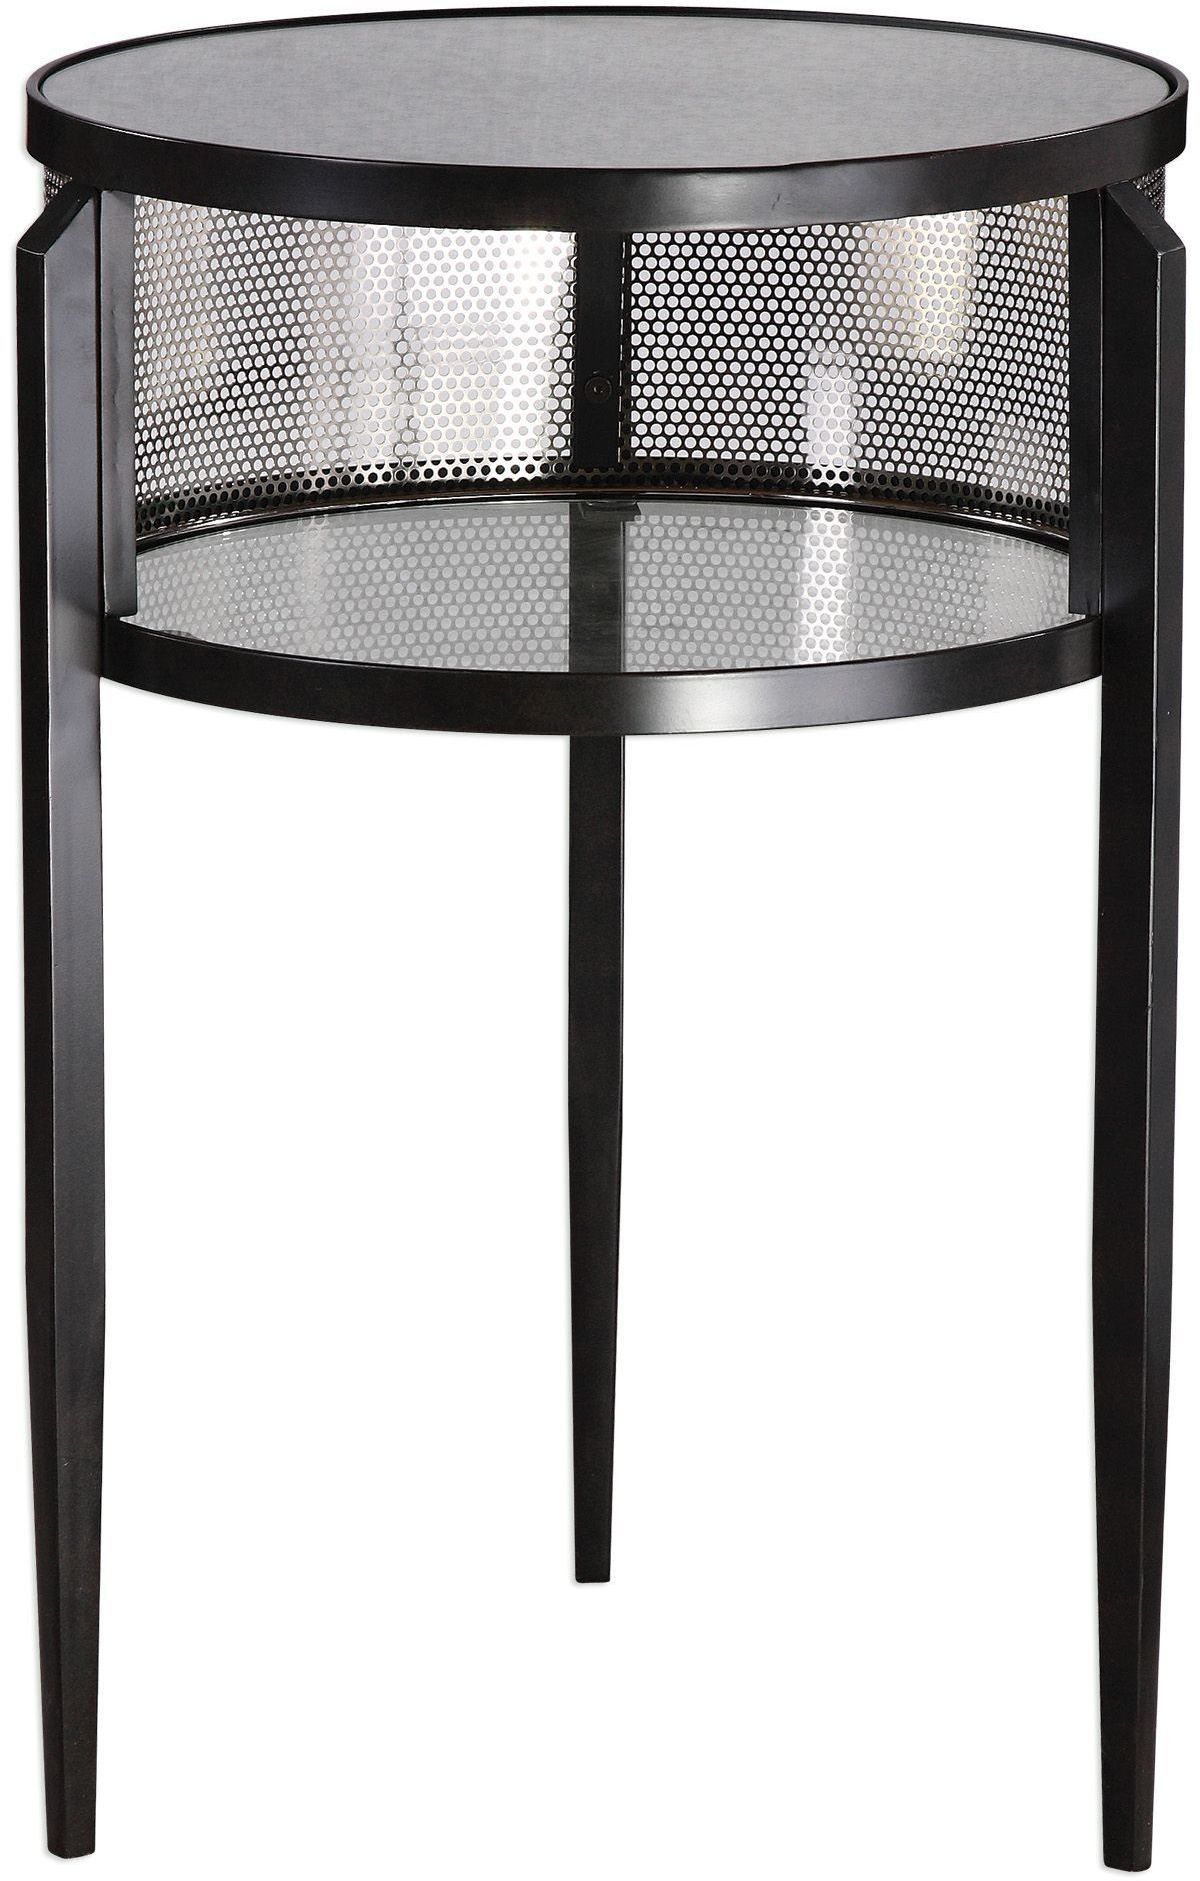 this drum style accent table finished aged black iron with slim tapered legs hampton bay patio furniture cushions home decor silver nesting tables italian coffee mirror white